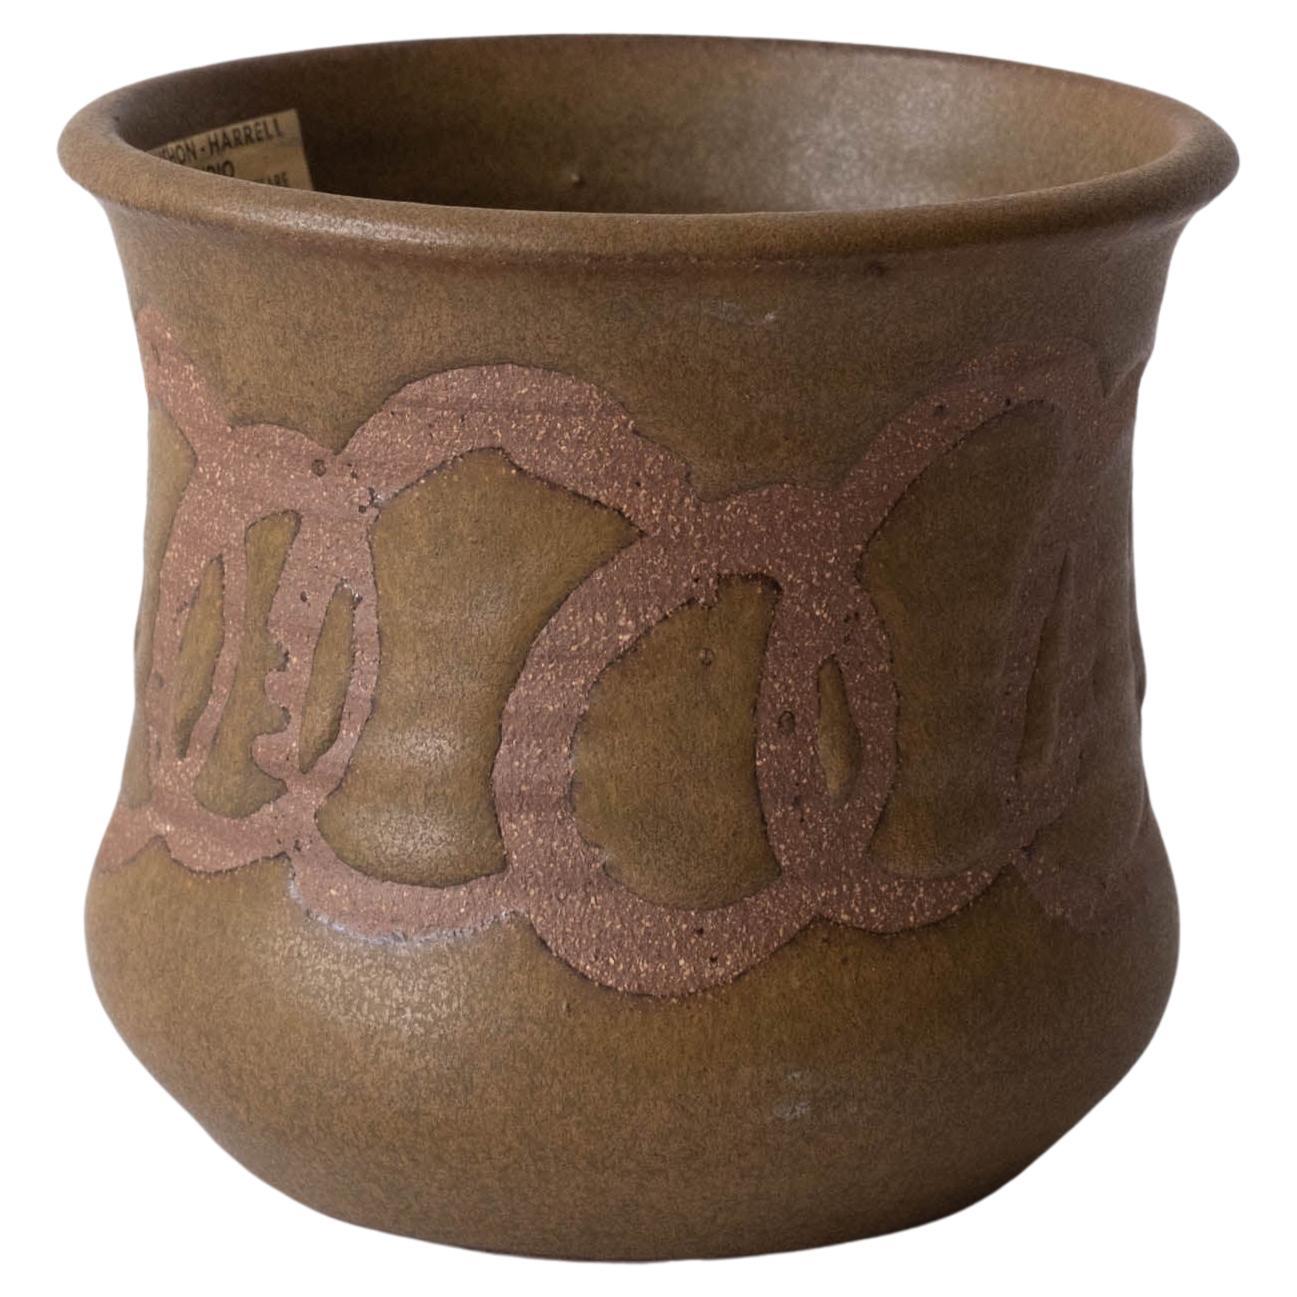  California Studio Pottery Planter by James Wishon and Jerry Harrell  For Sale